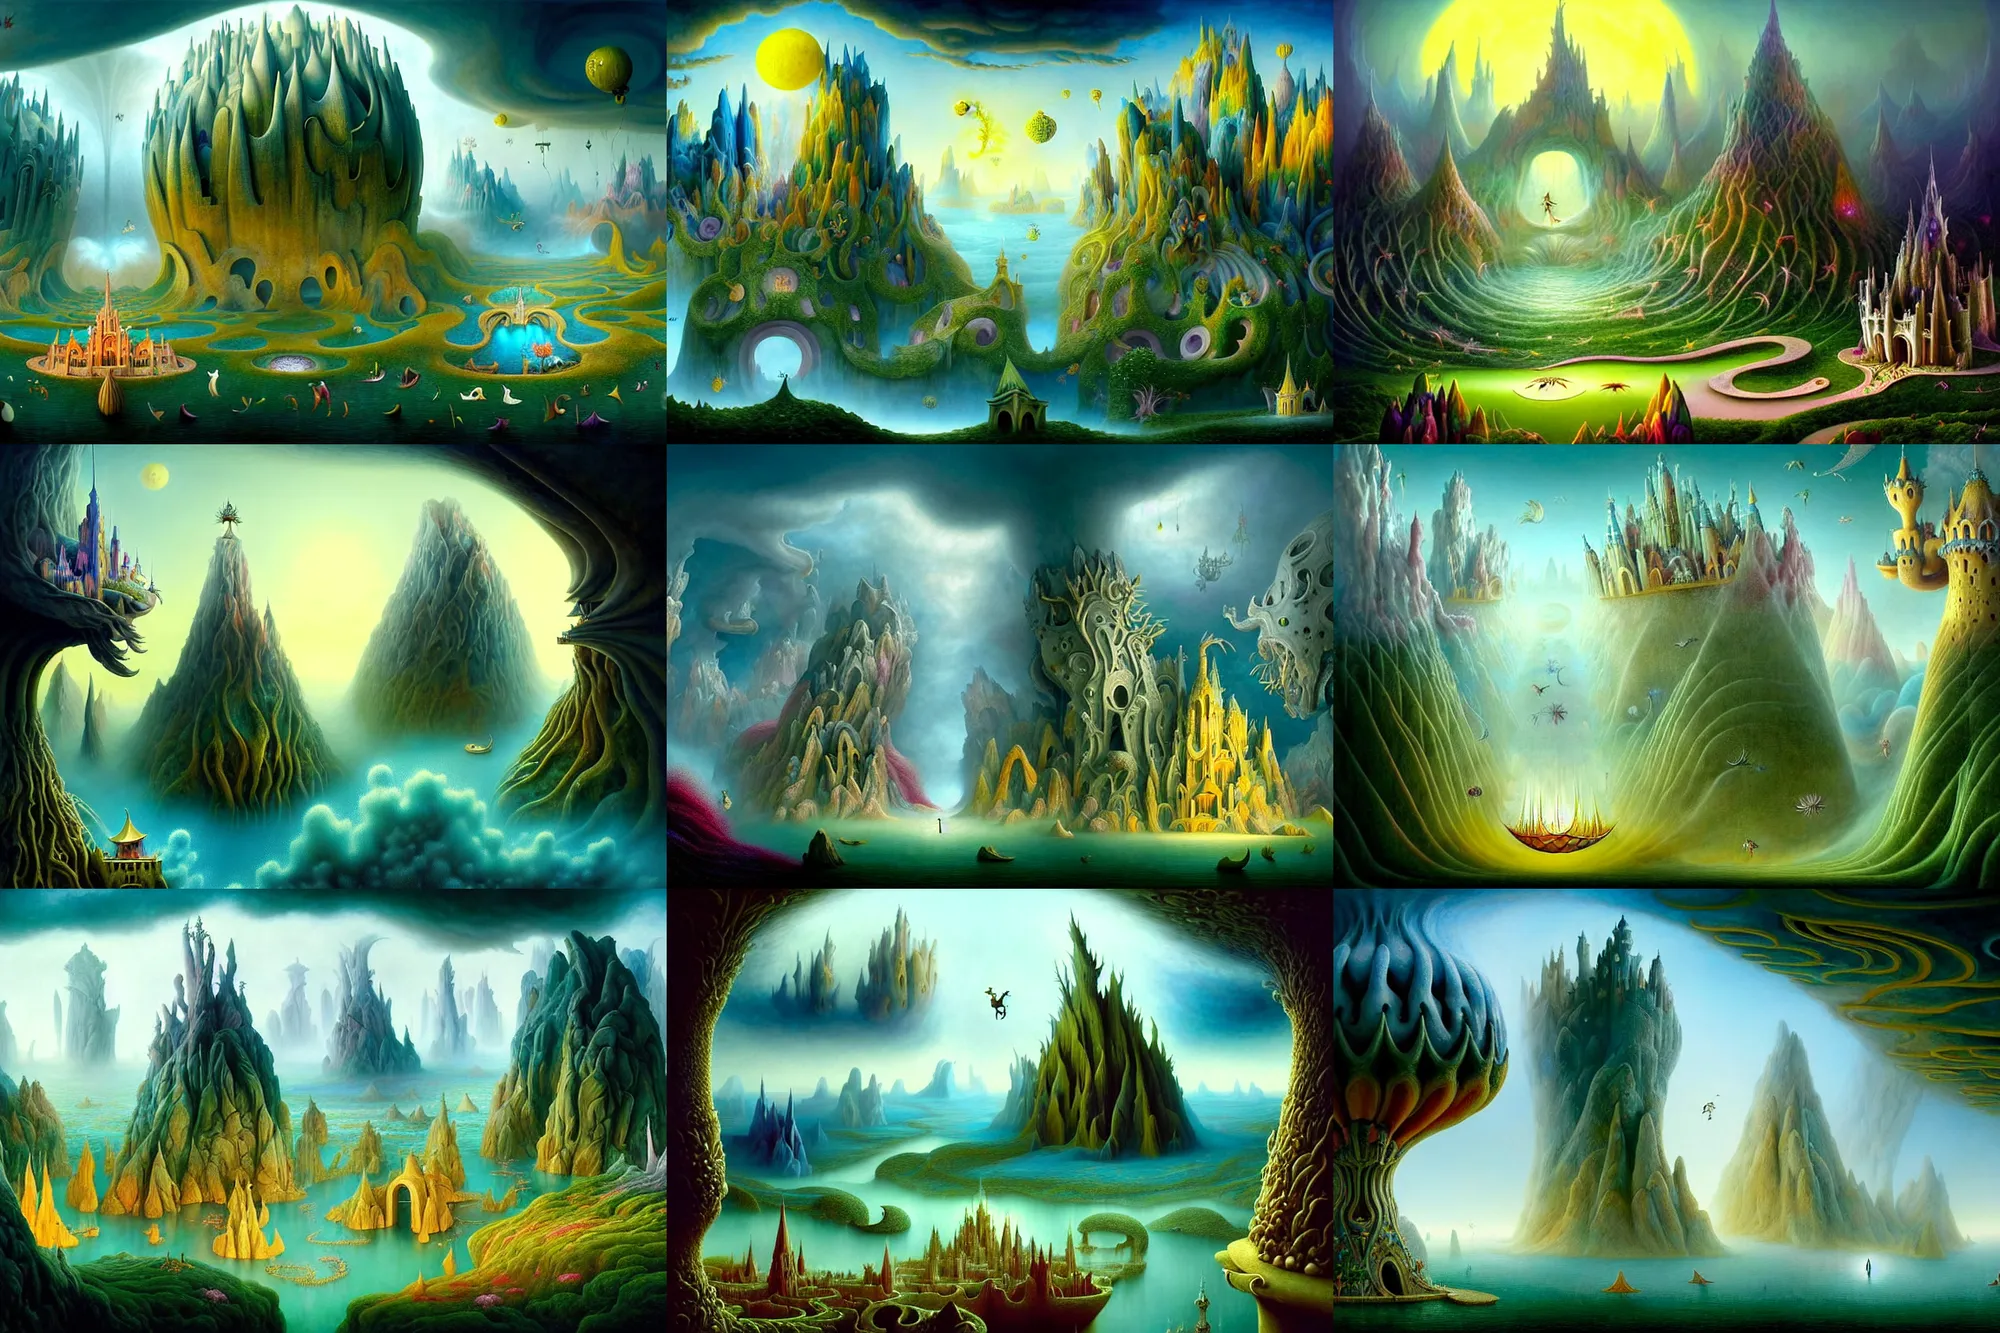 Prompt: a beguiling epic stunning beautiful and insanely detailed matte painting of windows into dream worlds with surreal architecture designed by Heironymous Bosch, dream world populated with mythical whimsical creatures, mega structures inspired by Heironymous Bosch's Garden of Earthly Delights, vast surreal landscape and horizon by Cyril Rolando and Kim Keever and Andrew Ferez, masterpiece!!!, grand!, imaginative!!!, whimsical!!, epic scale, intricate details, sense of awe, elite, wonder, insanely complex, masterful composition!!!, sharp focus, fantasy realism, dramatic lighting